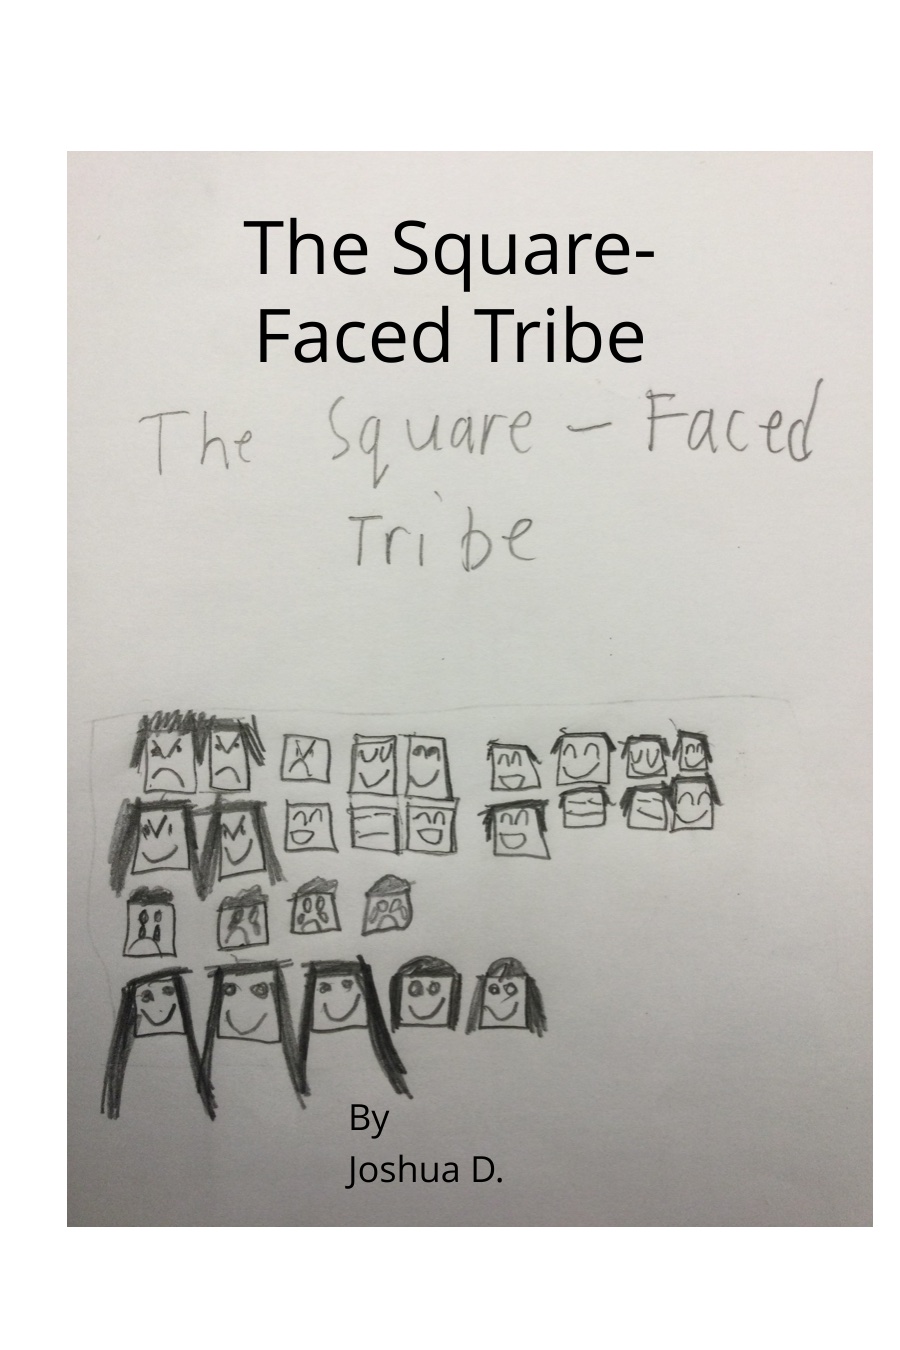 The Square-Faced Tribe by Joshua D